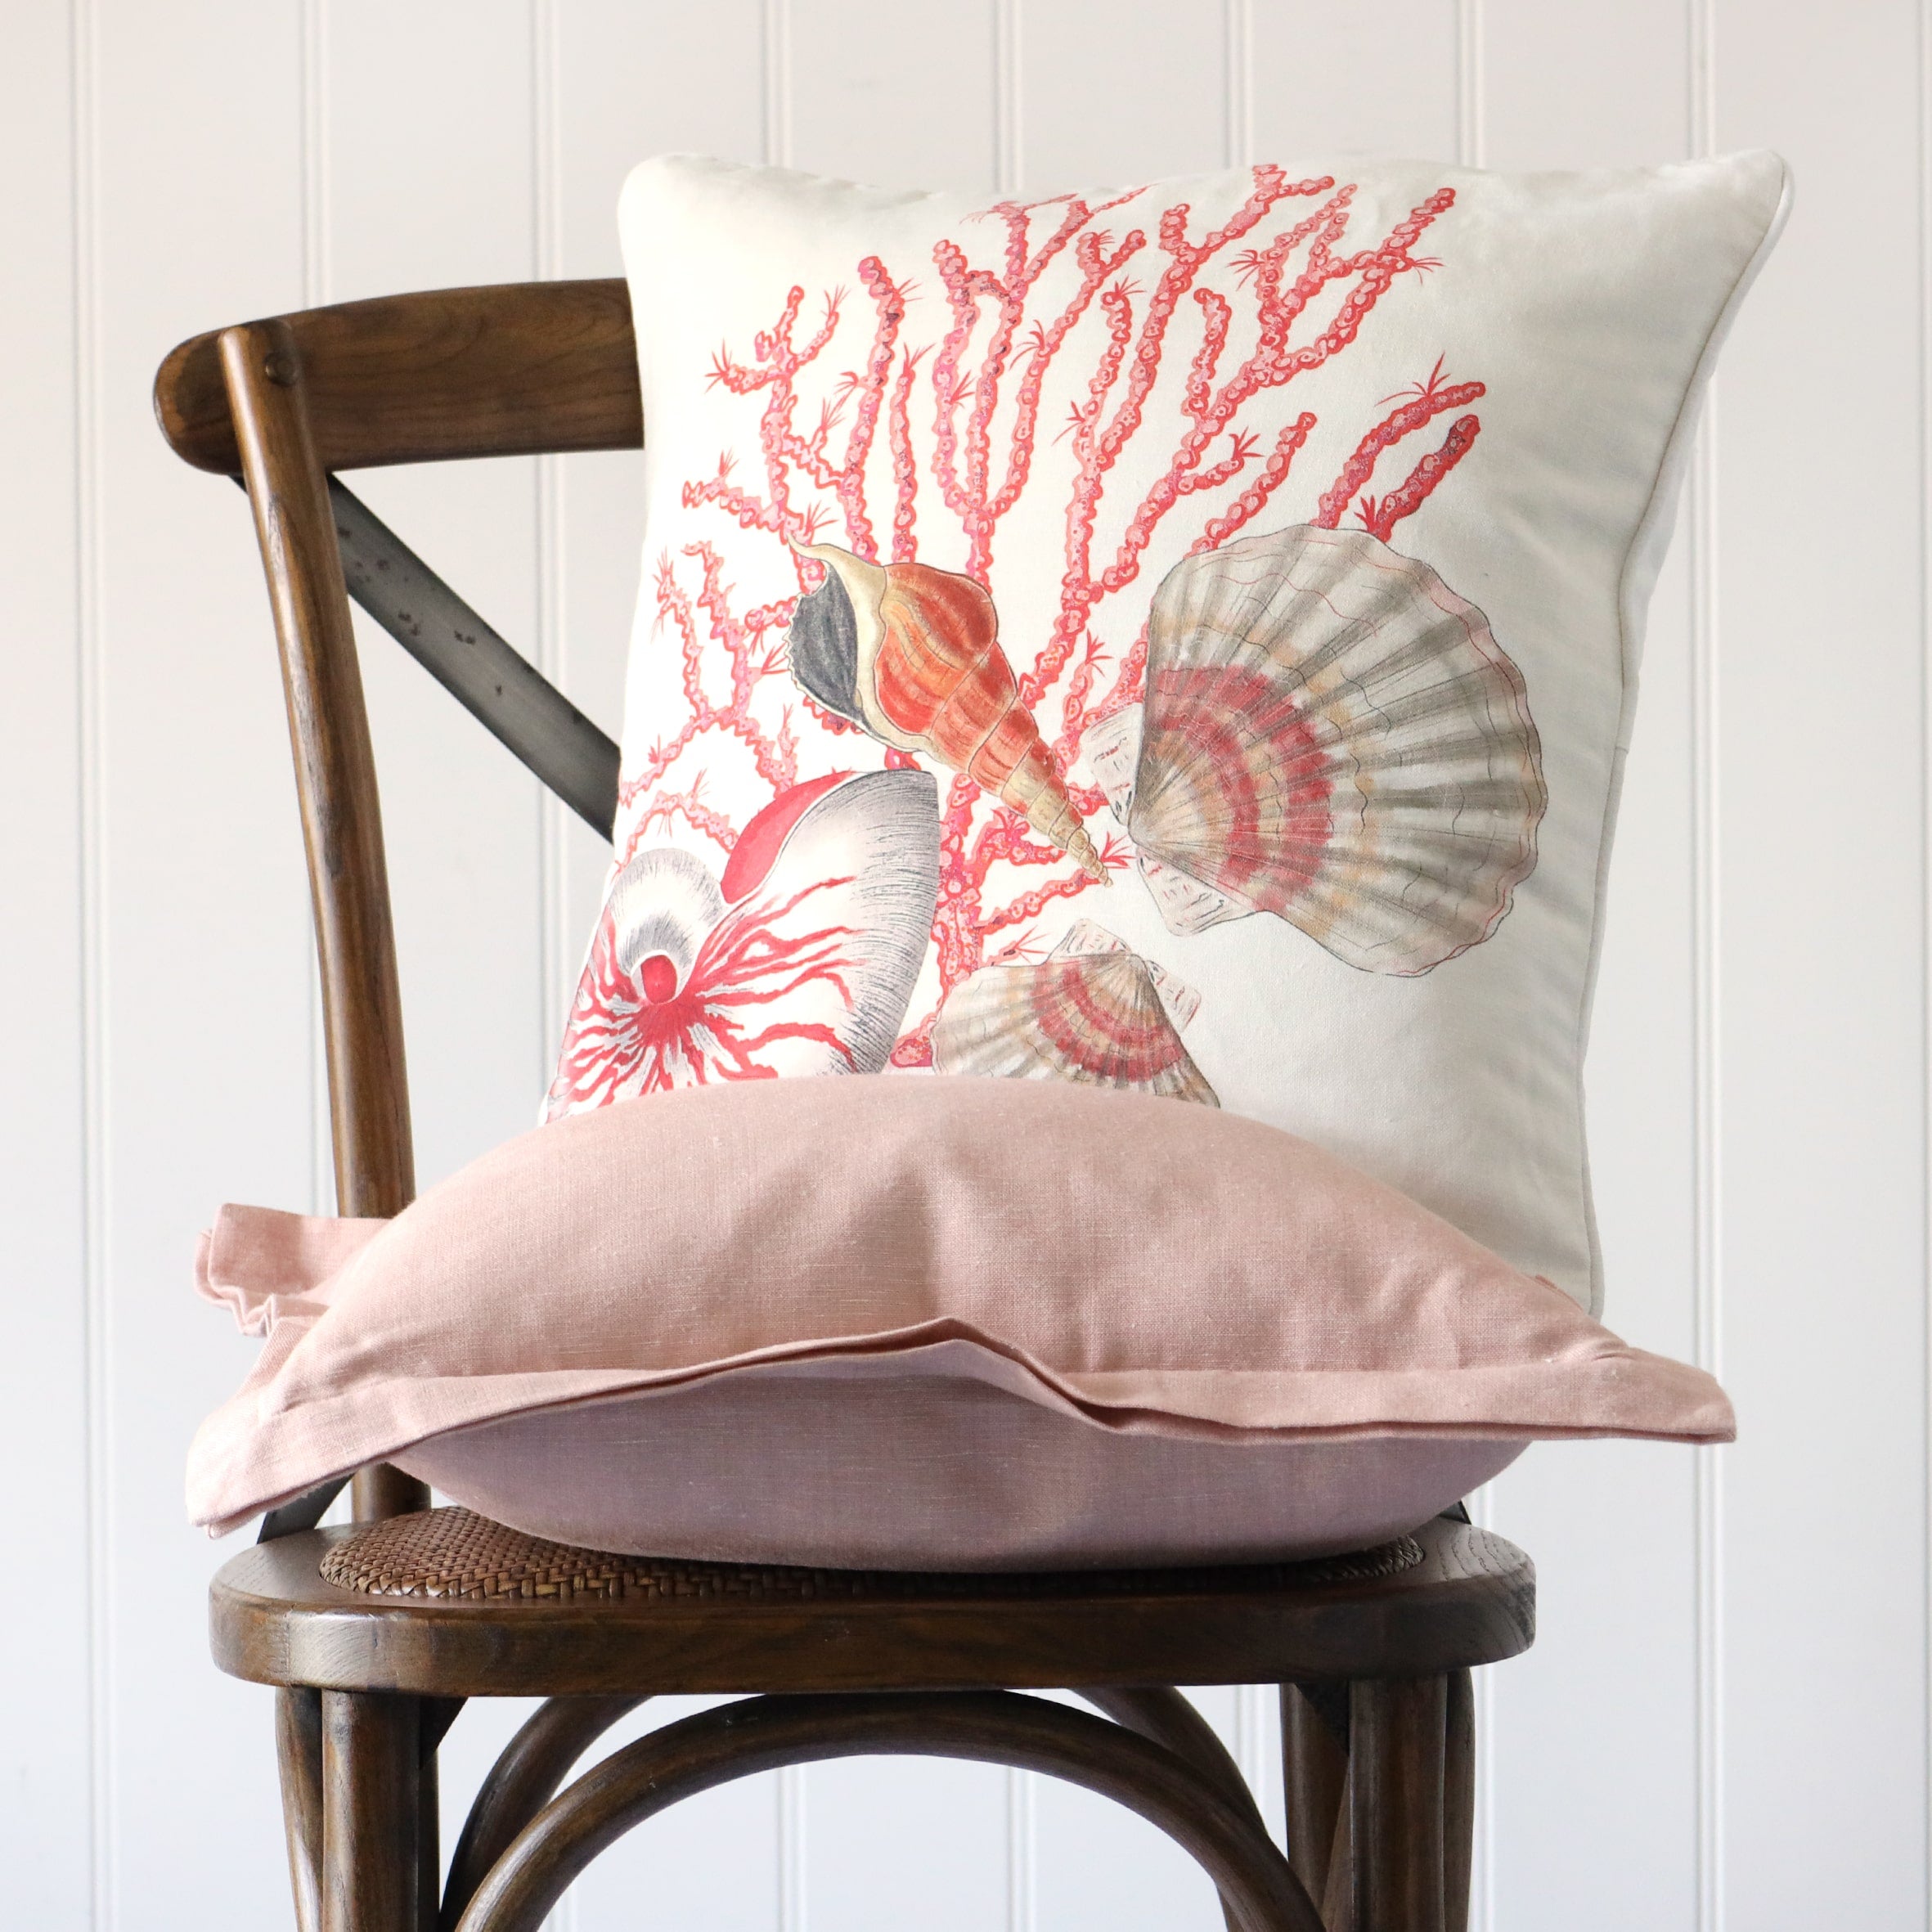 soft pink chambray cushion sitting on a wooden chair with an illustrated cushion of nautilus shell scallops and coral in tones of pink on a white ground sitting on top of it